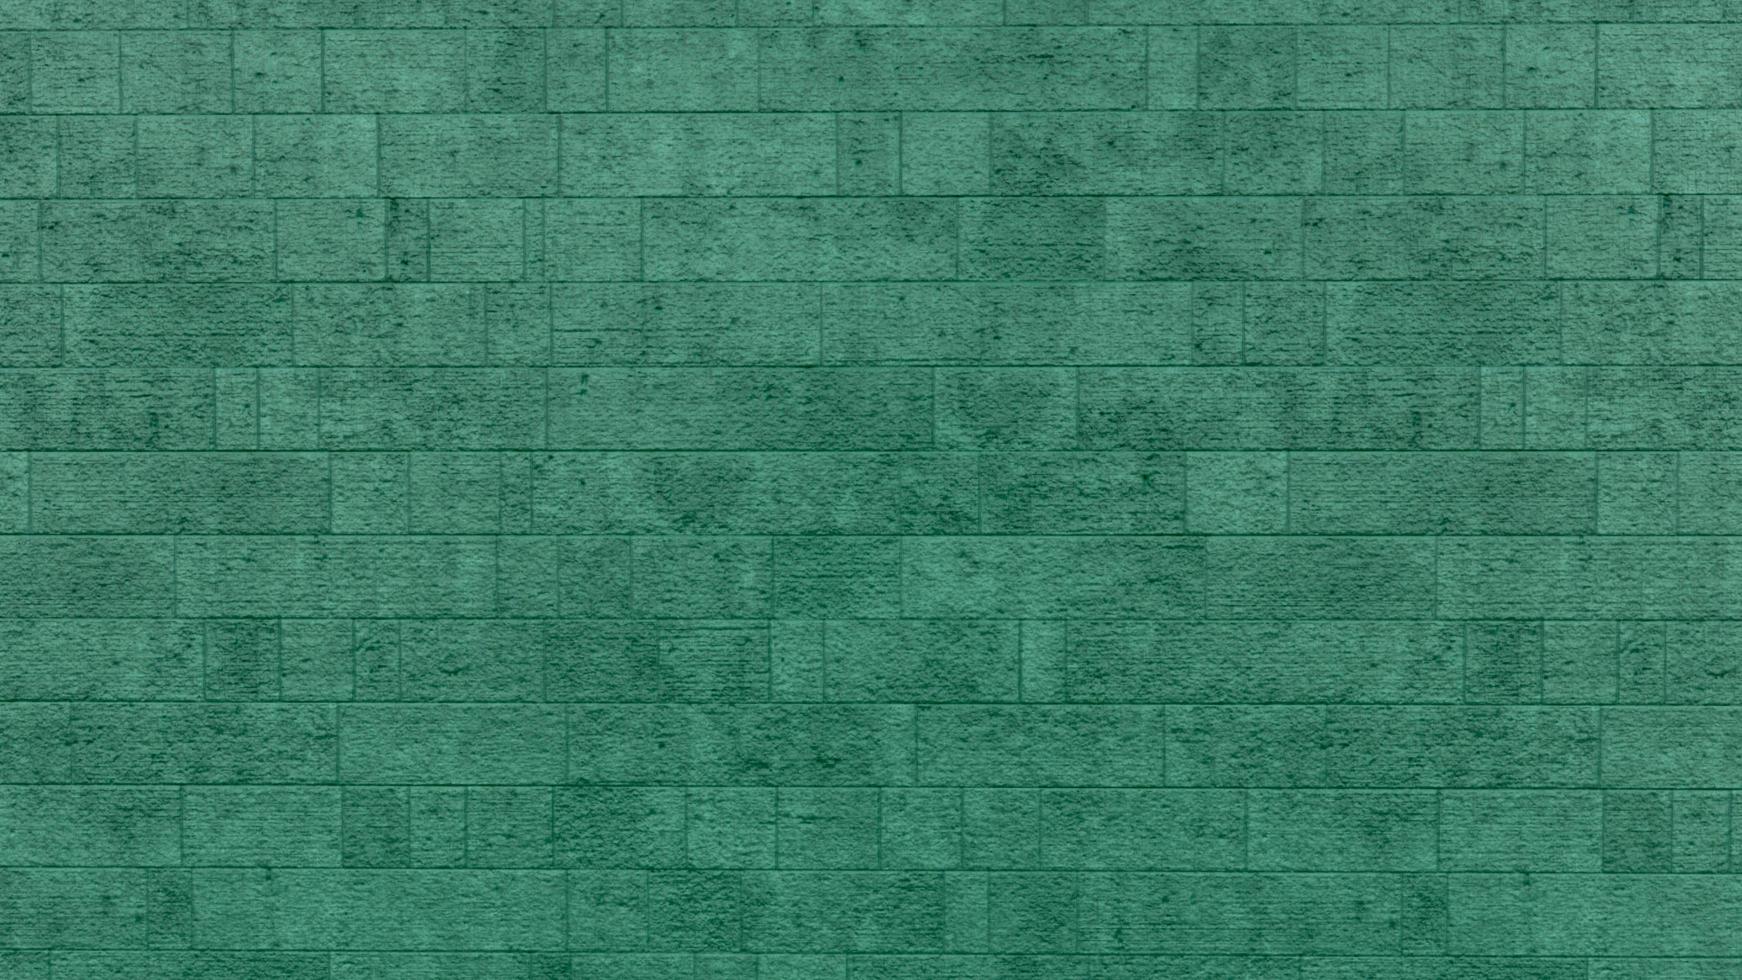 Wall texture green for background or cover photo